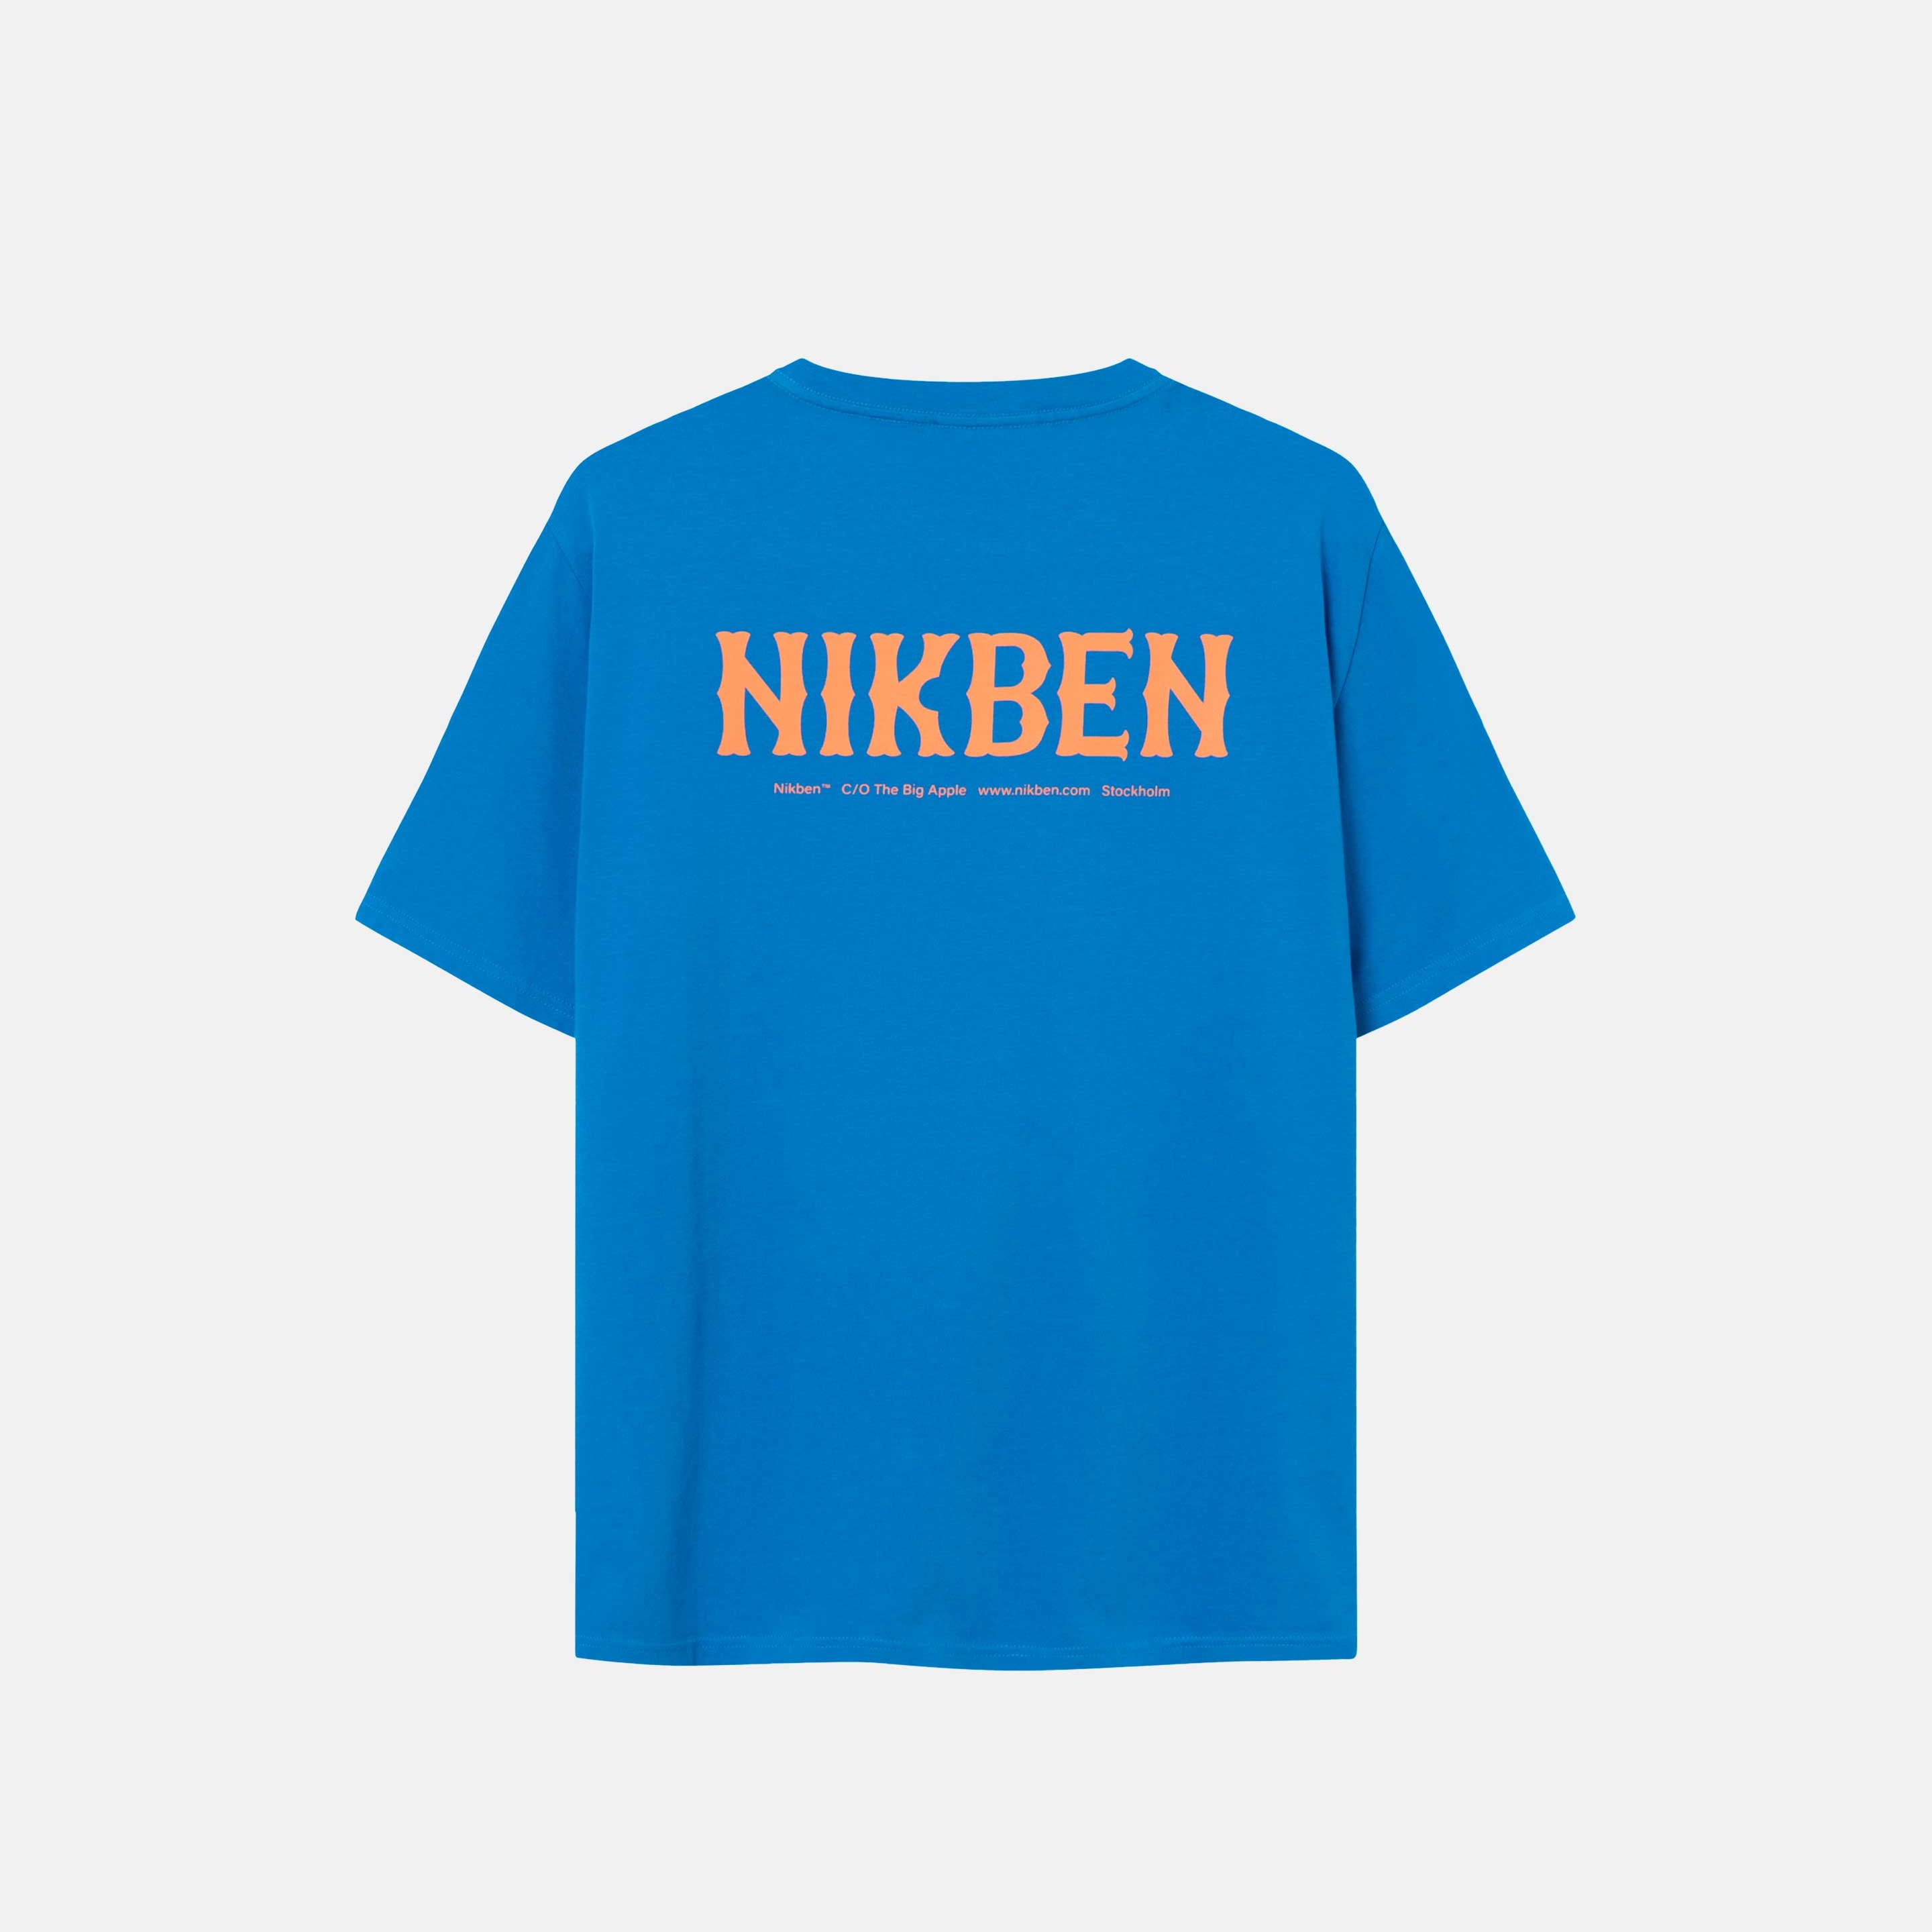 Back view of blue t-shirt with orange "Nikben" text print.